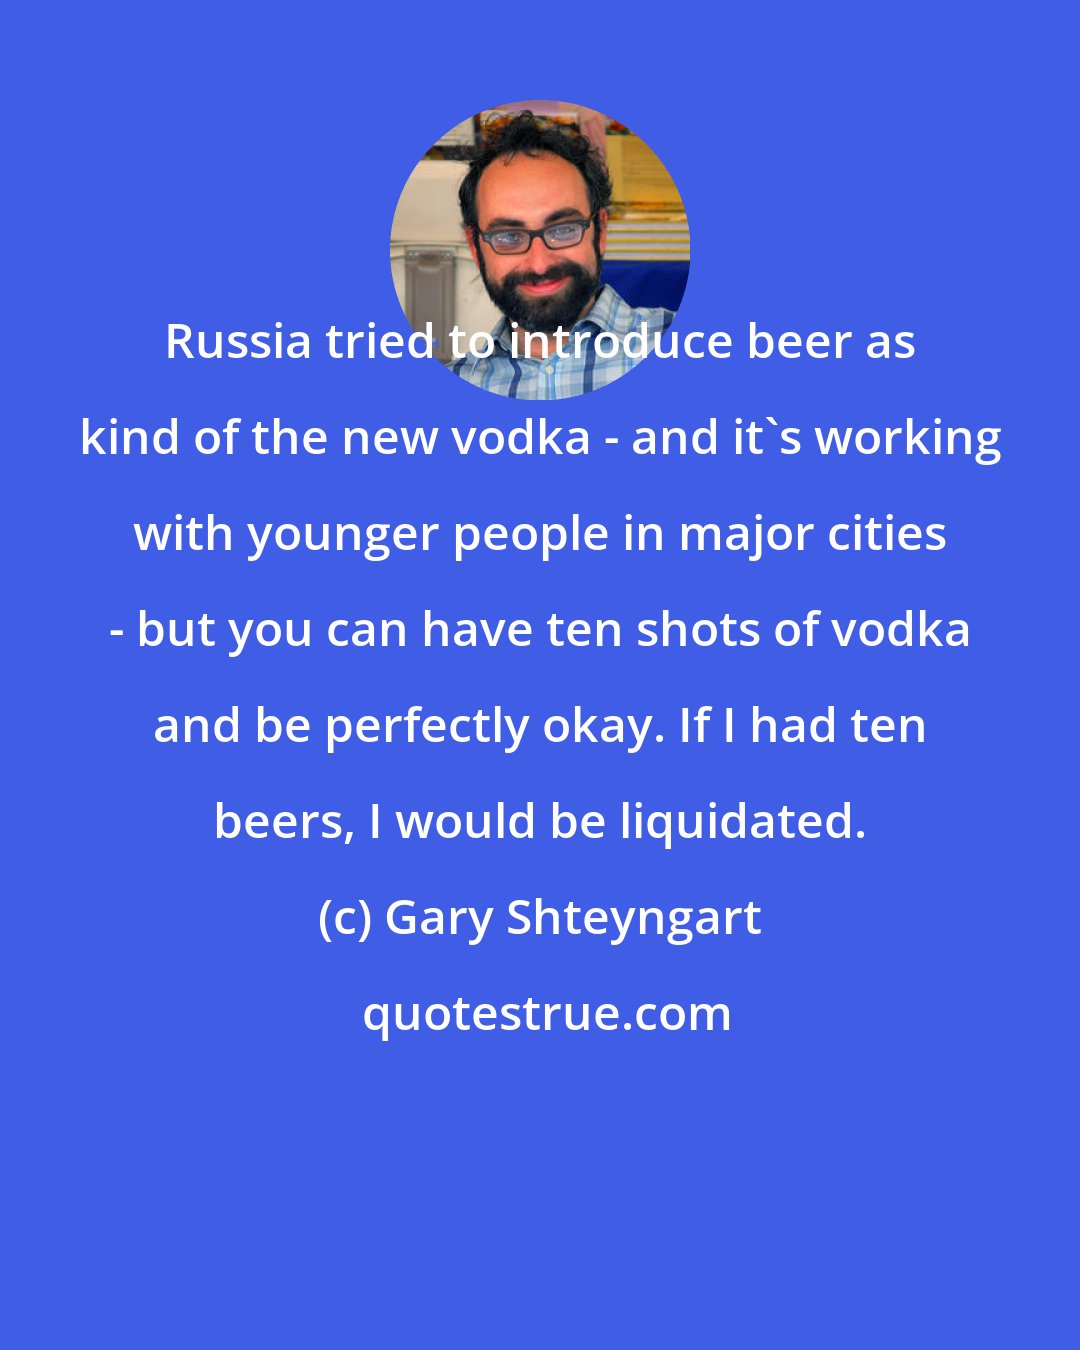 Gary Shteyngart: Russia tried to introduce beer as kind of the new vodka - and it's working with younger people in major cities - but you can have ten shots of vodka and be perfectly okay. If I had ten beers, I would be liquidated.